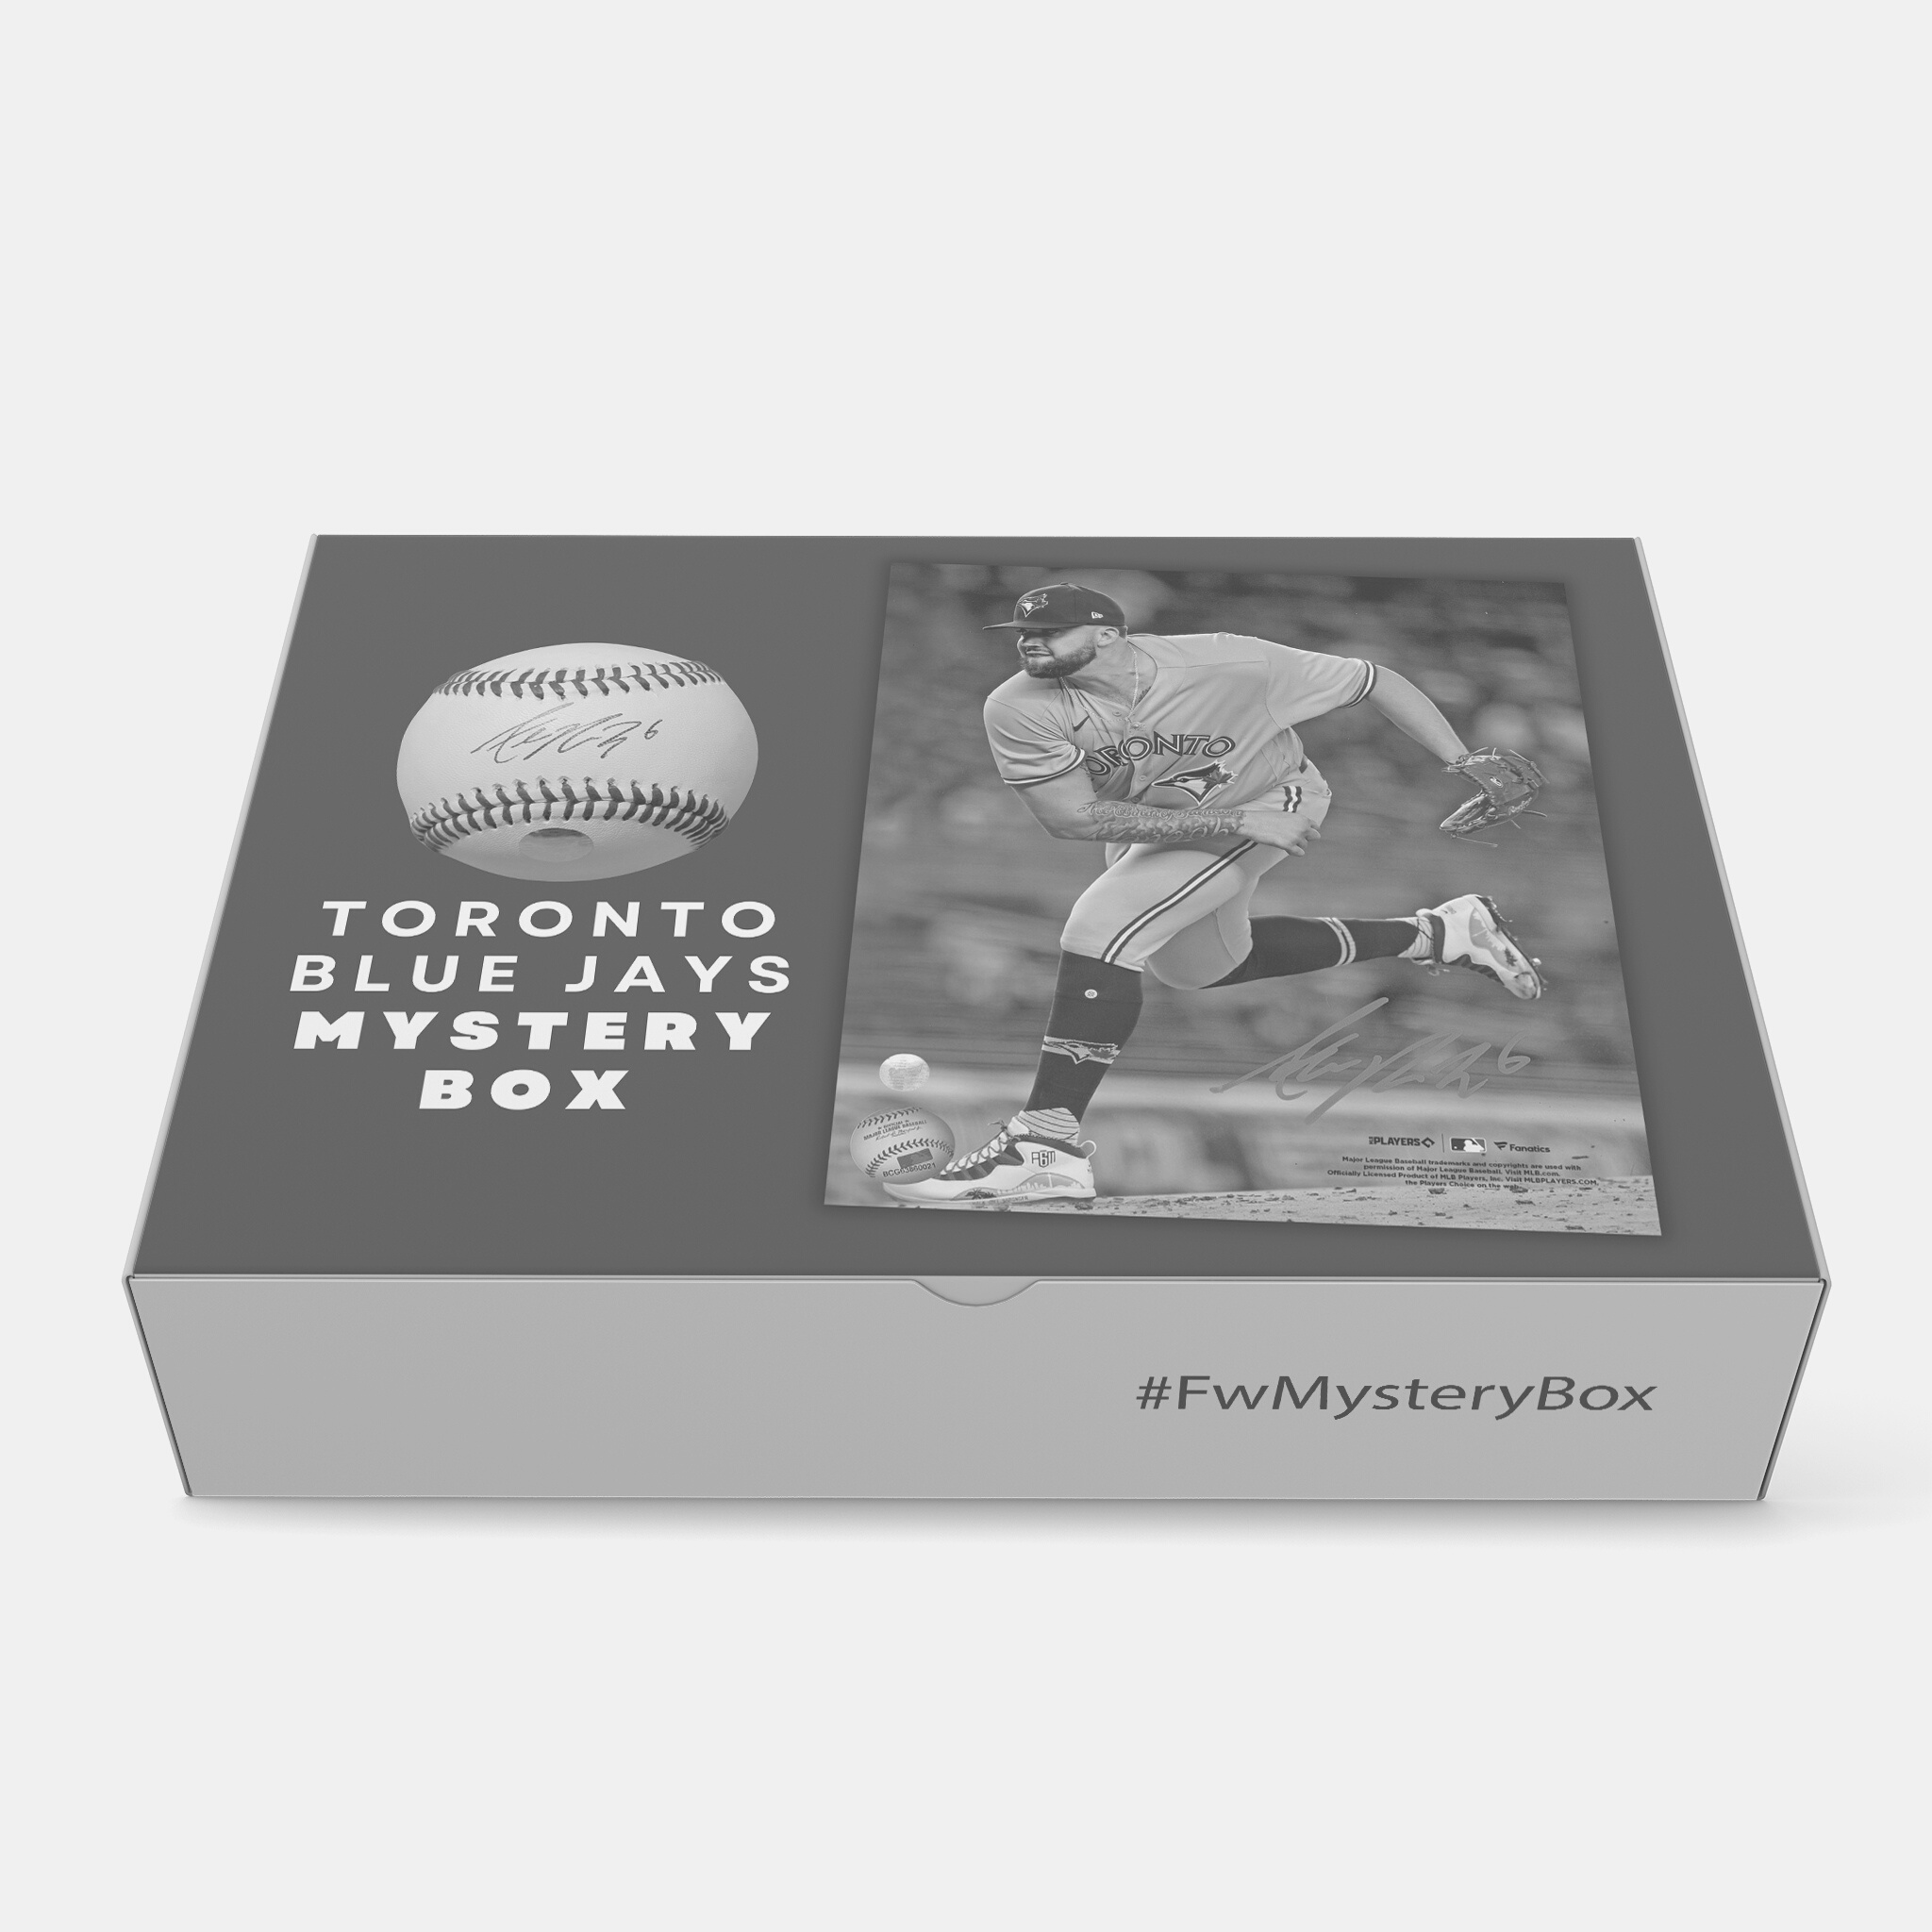 Alek Manoah Signed Toronto Blue Jays 2022 All-Star Game Replica Nike Jersey  Inscribed with 1st All-Star Game and 2022 (Limited Edition of 66)